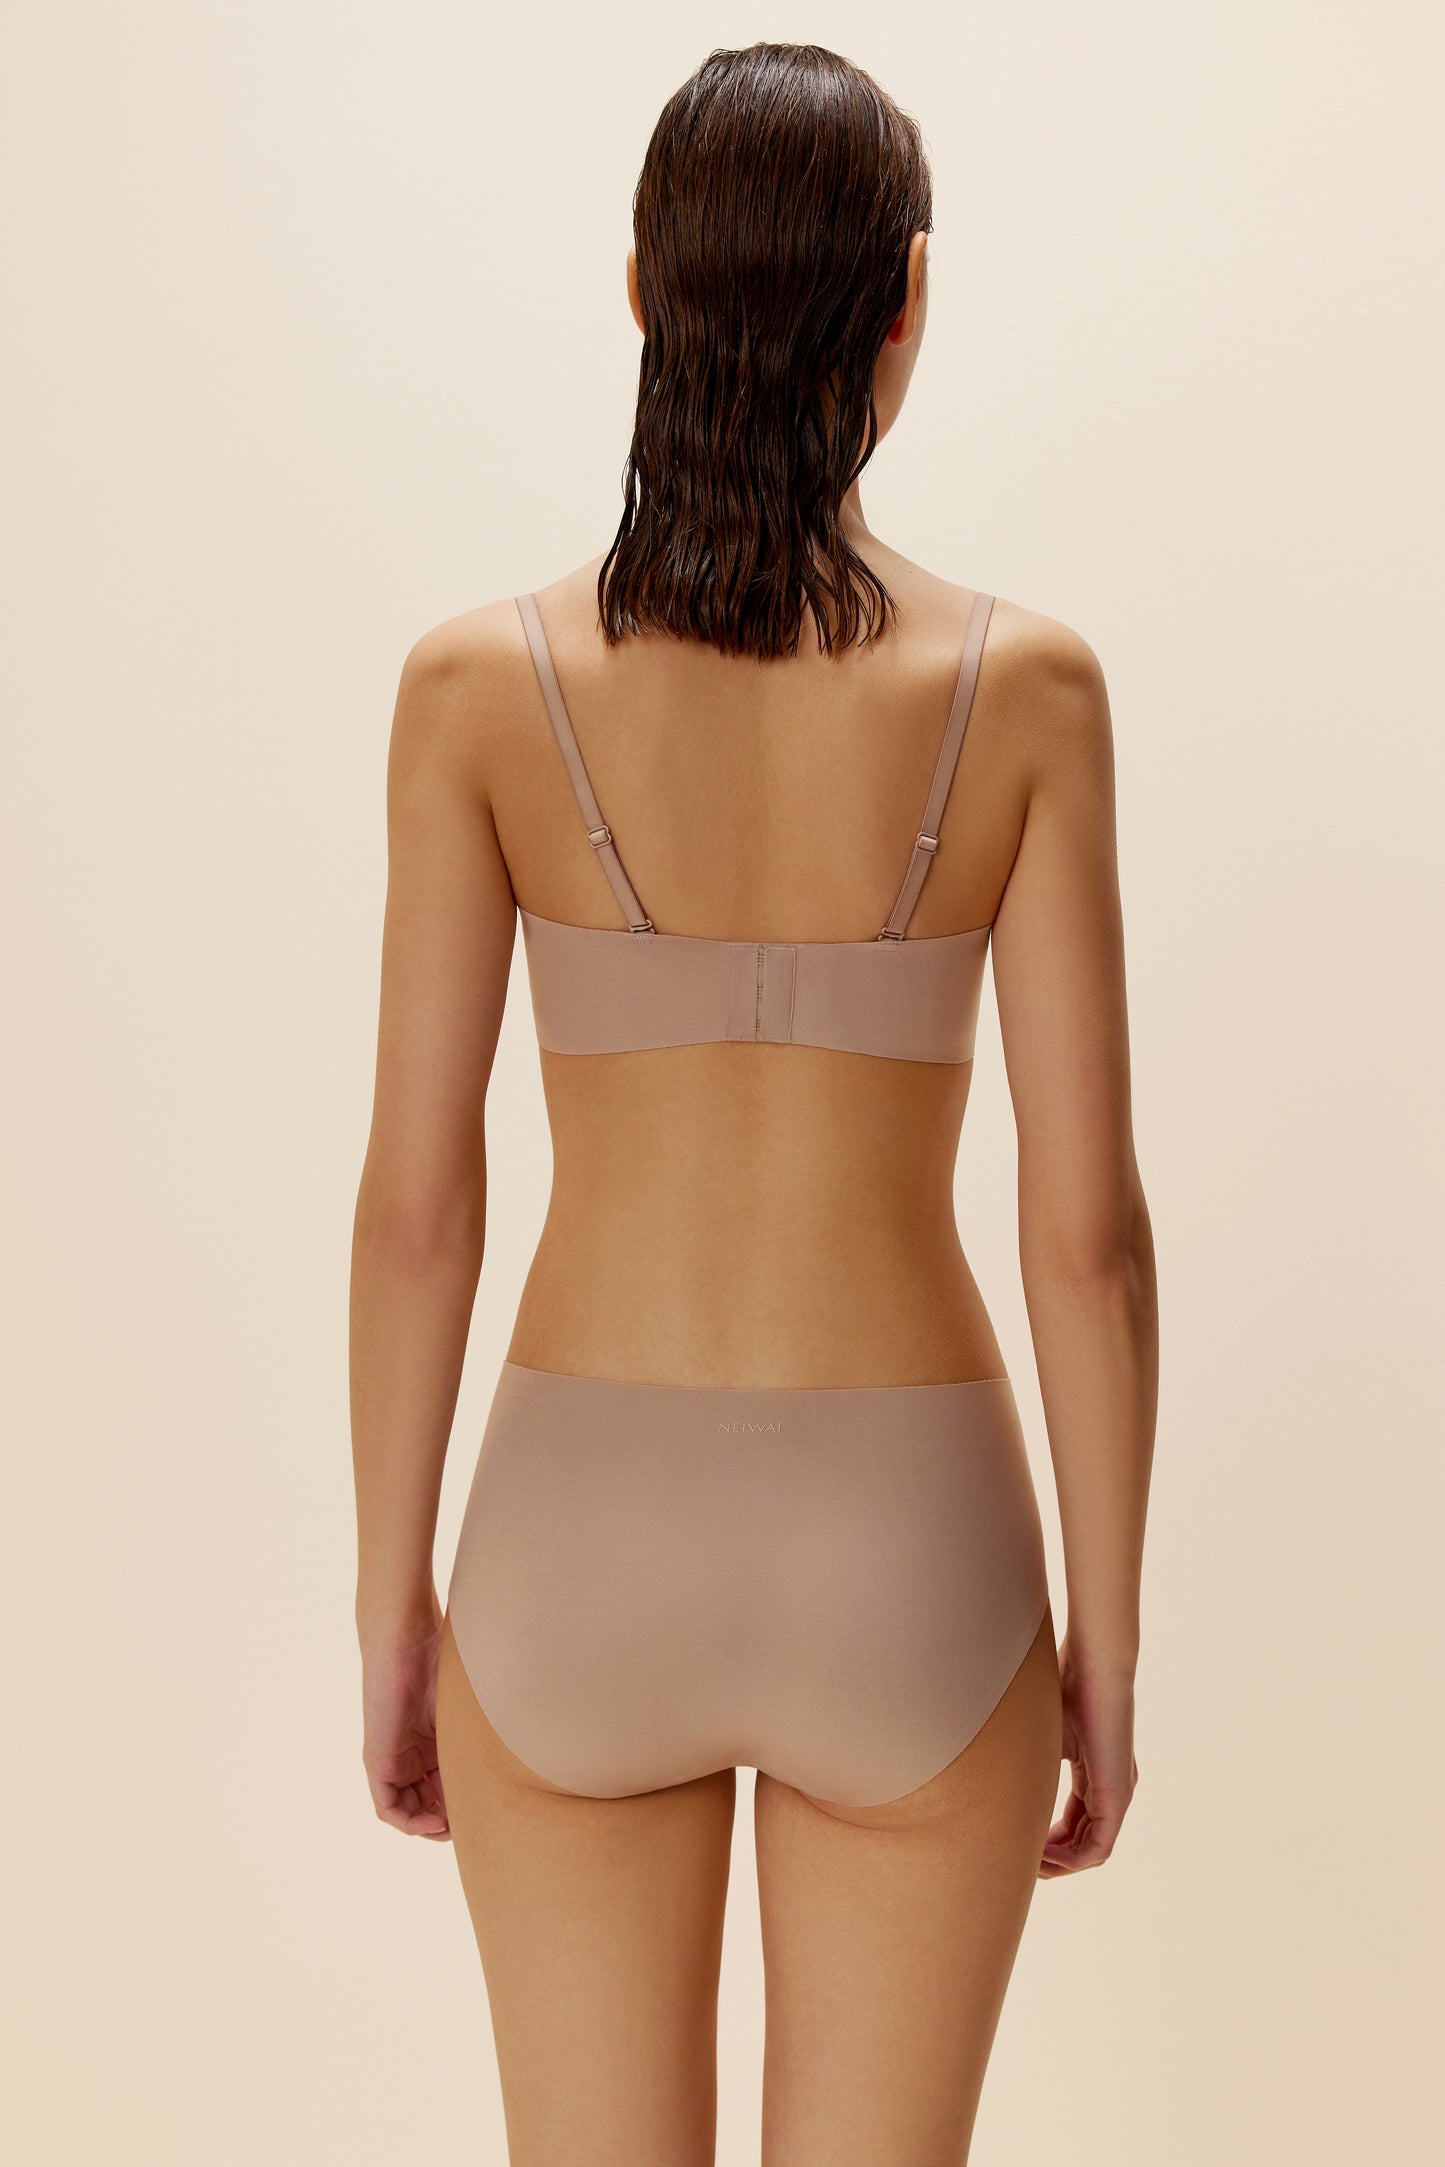 Back view of woman wearing blush-colored bra with straps and underwear set